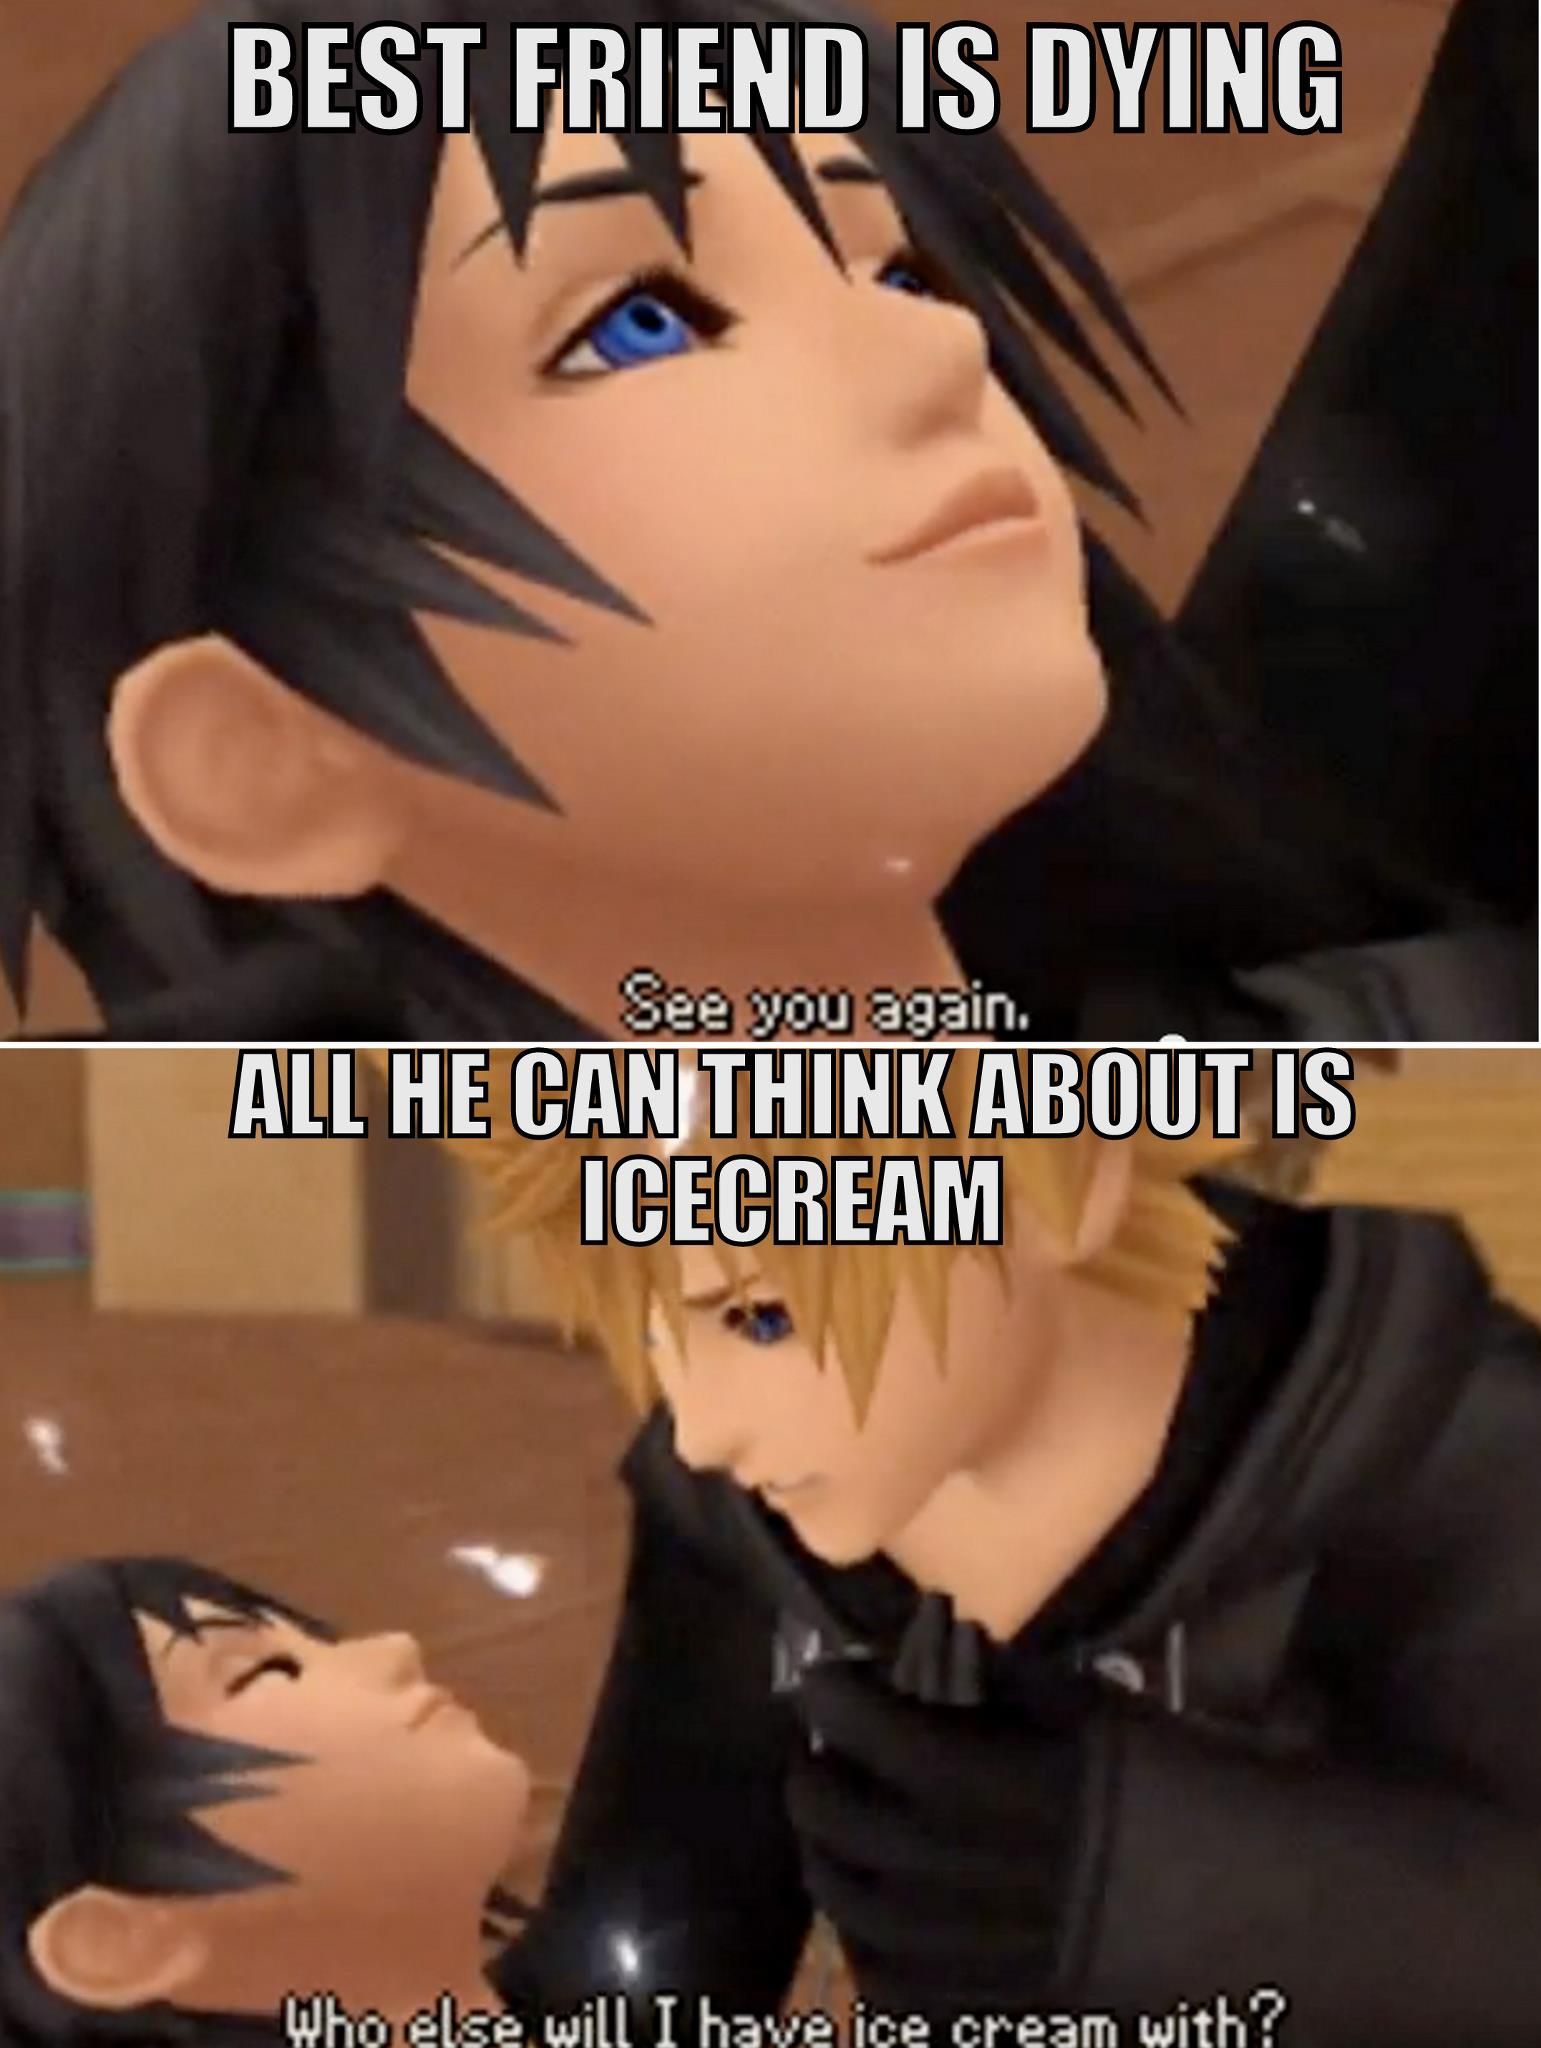 Xion dying who will I have ice cream with